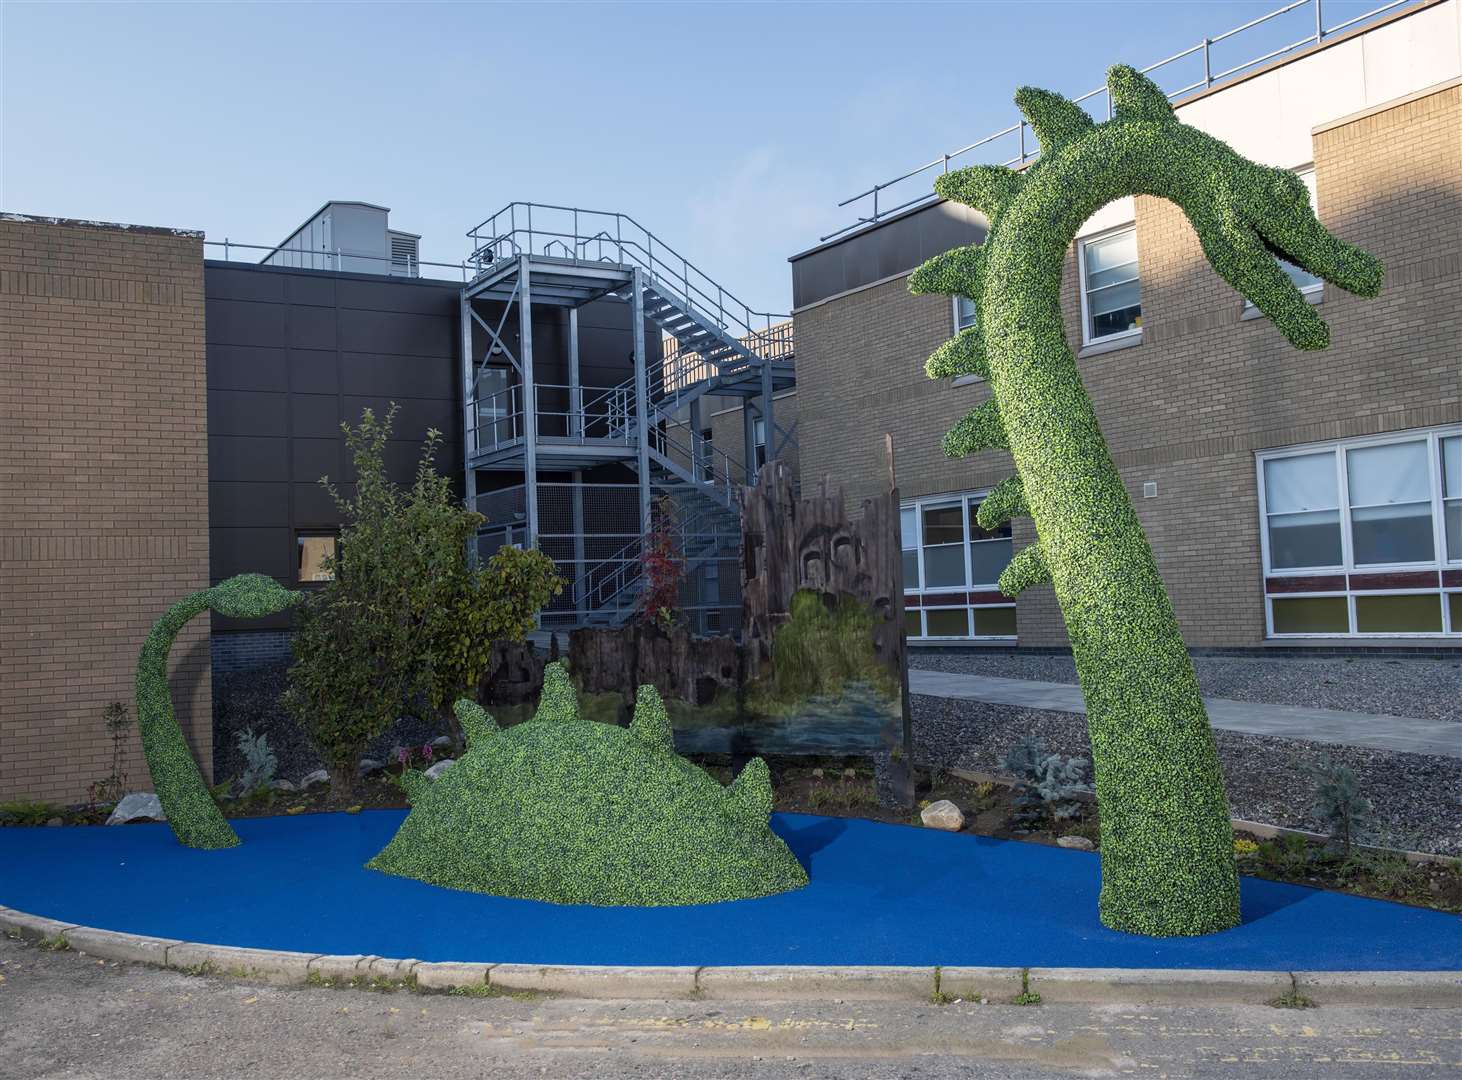 The topiary Nessie outside the Highland Children’s Unit.